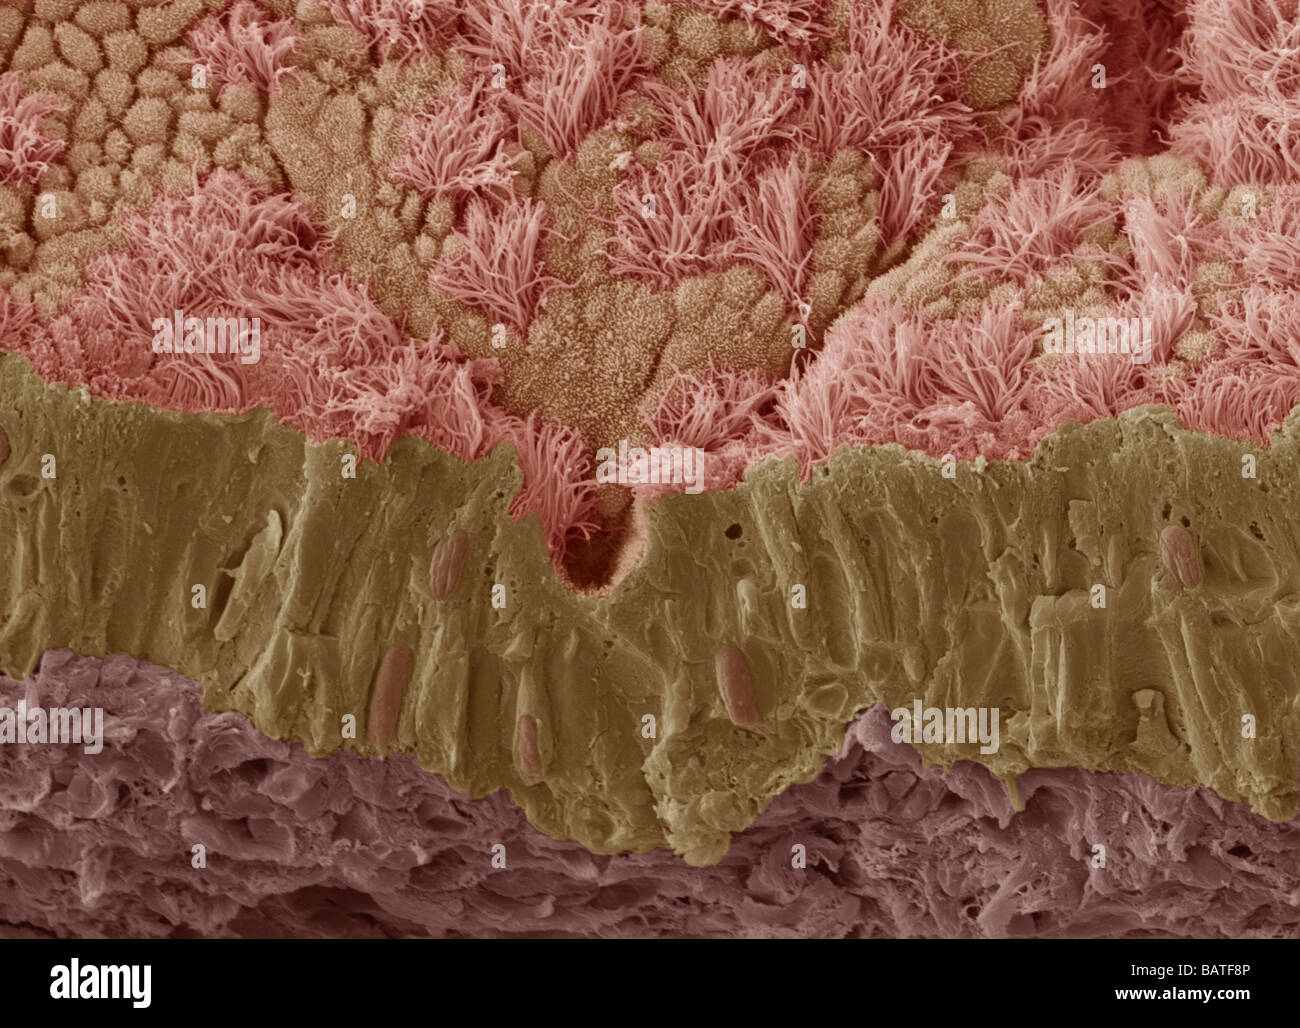 Trachea mucous membrane. Coloured scanningelectron micrograph (SEM) of a fractured mucousmembrane of the trachea (wind pipe) Stock Photo